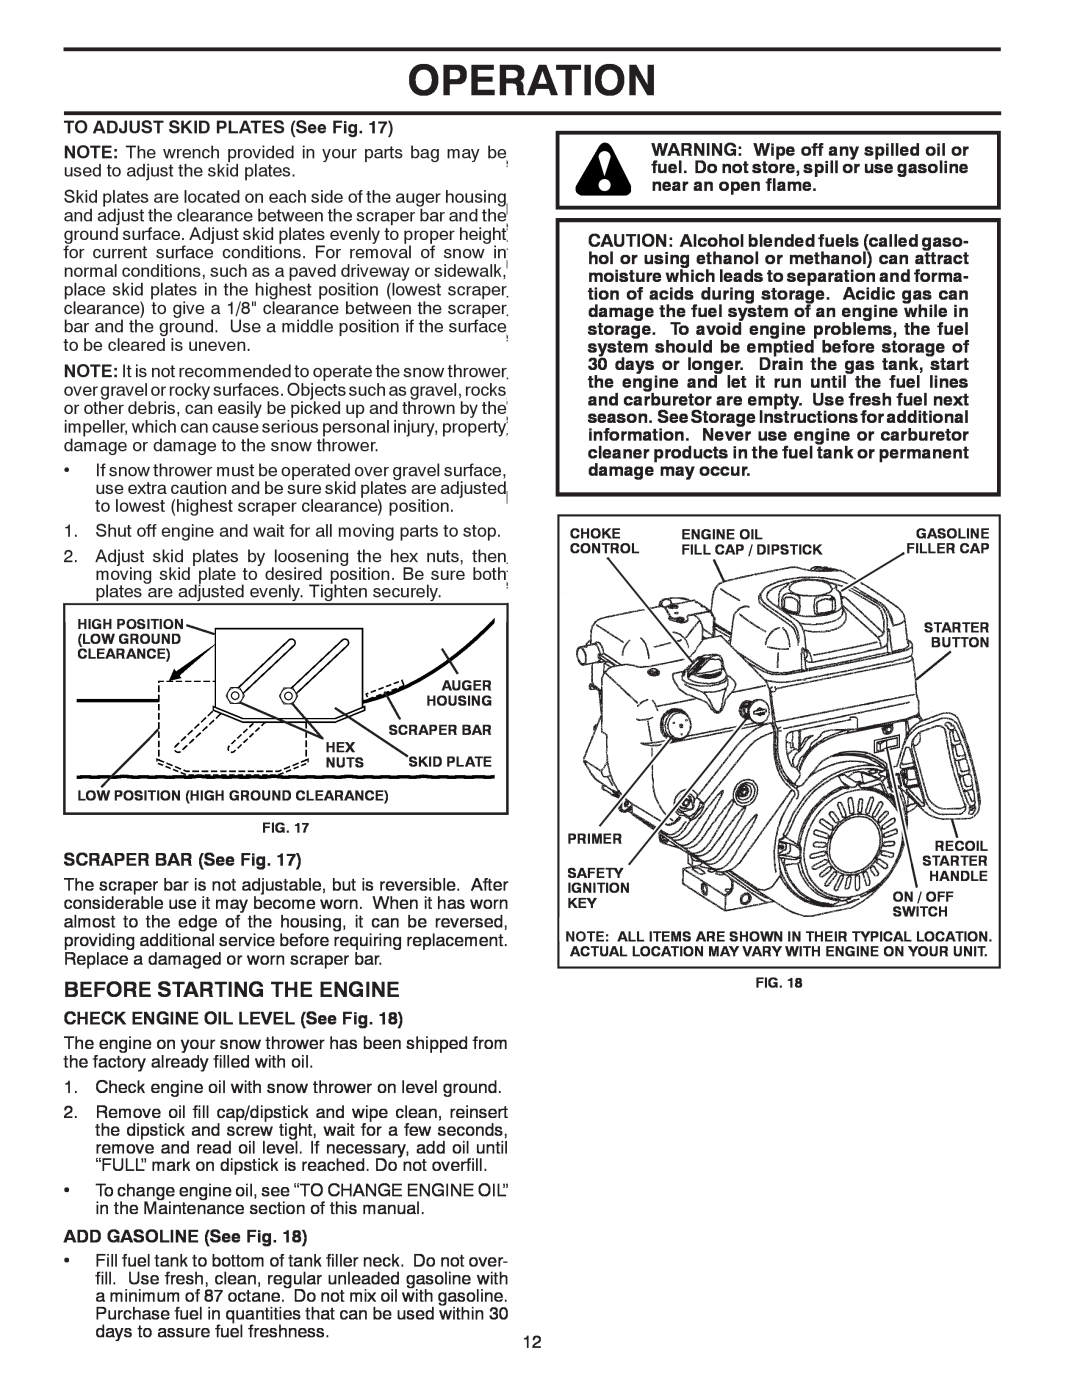 Poulan 437970, 96192003503 Before Starting The Engine, Operation, TO ADJUST SKID PLATES See Fig, SCRAPER BAR See Fig 